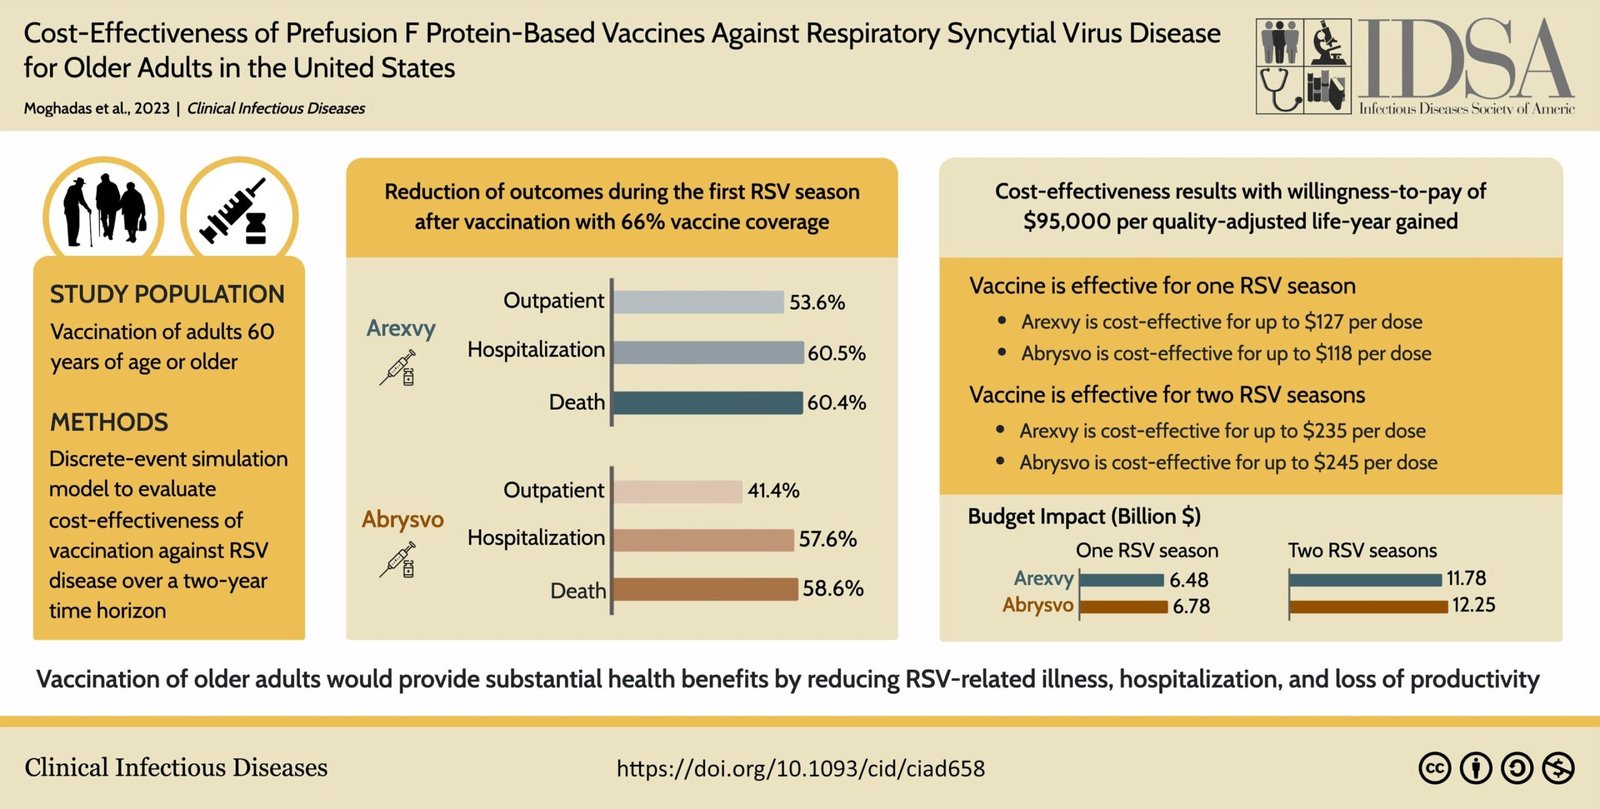 RSV vaccines would greatly reduce illness if implemented like flu shots, research suggests